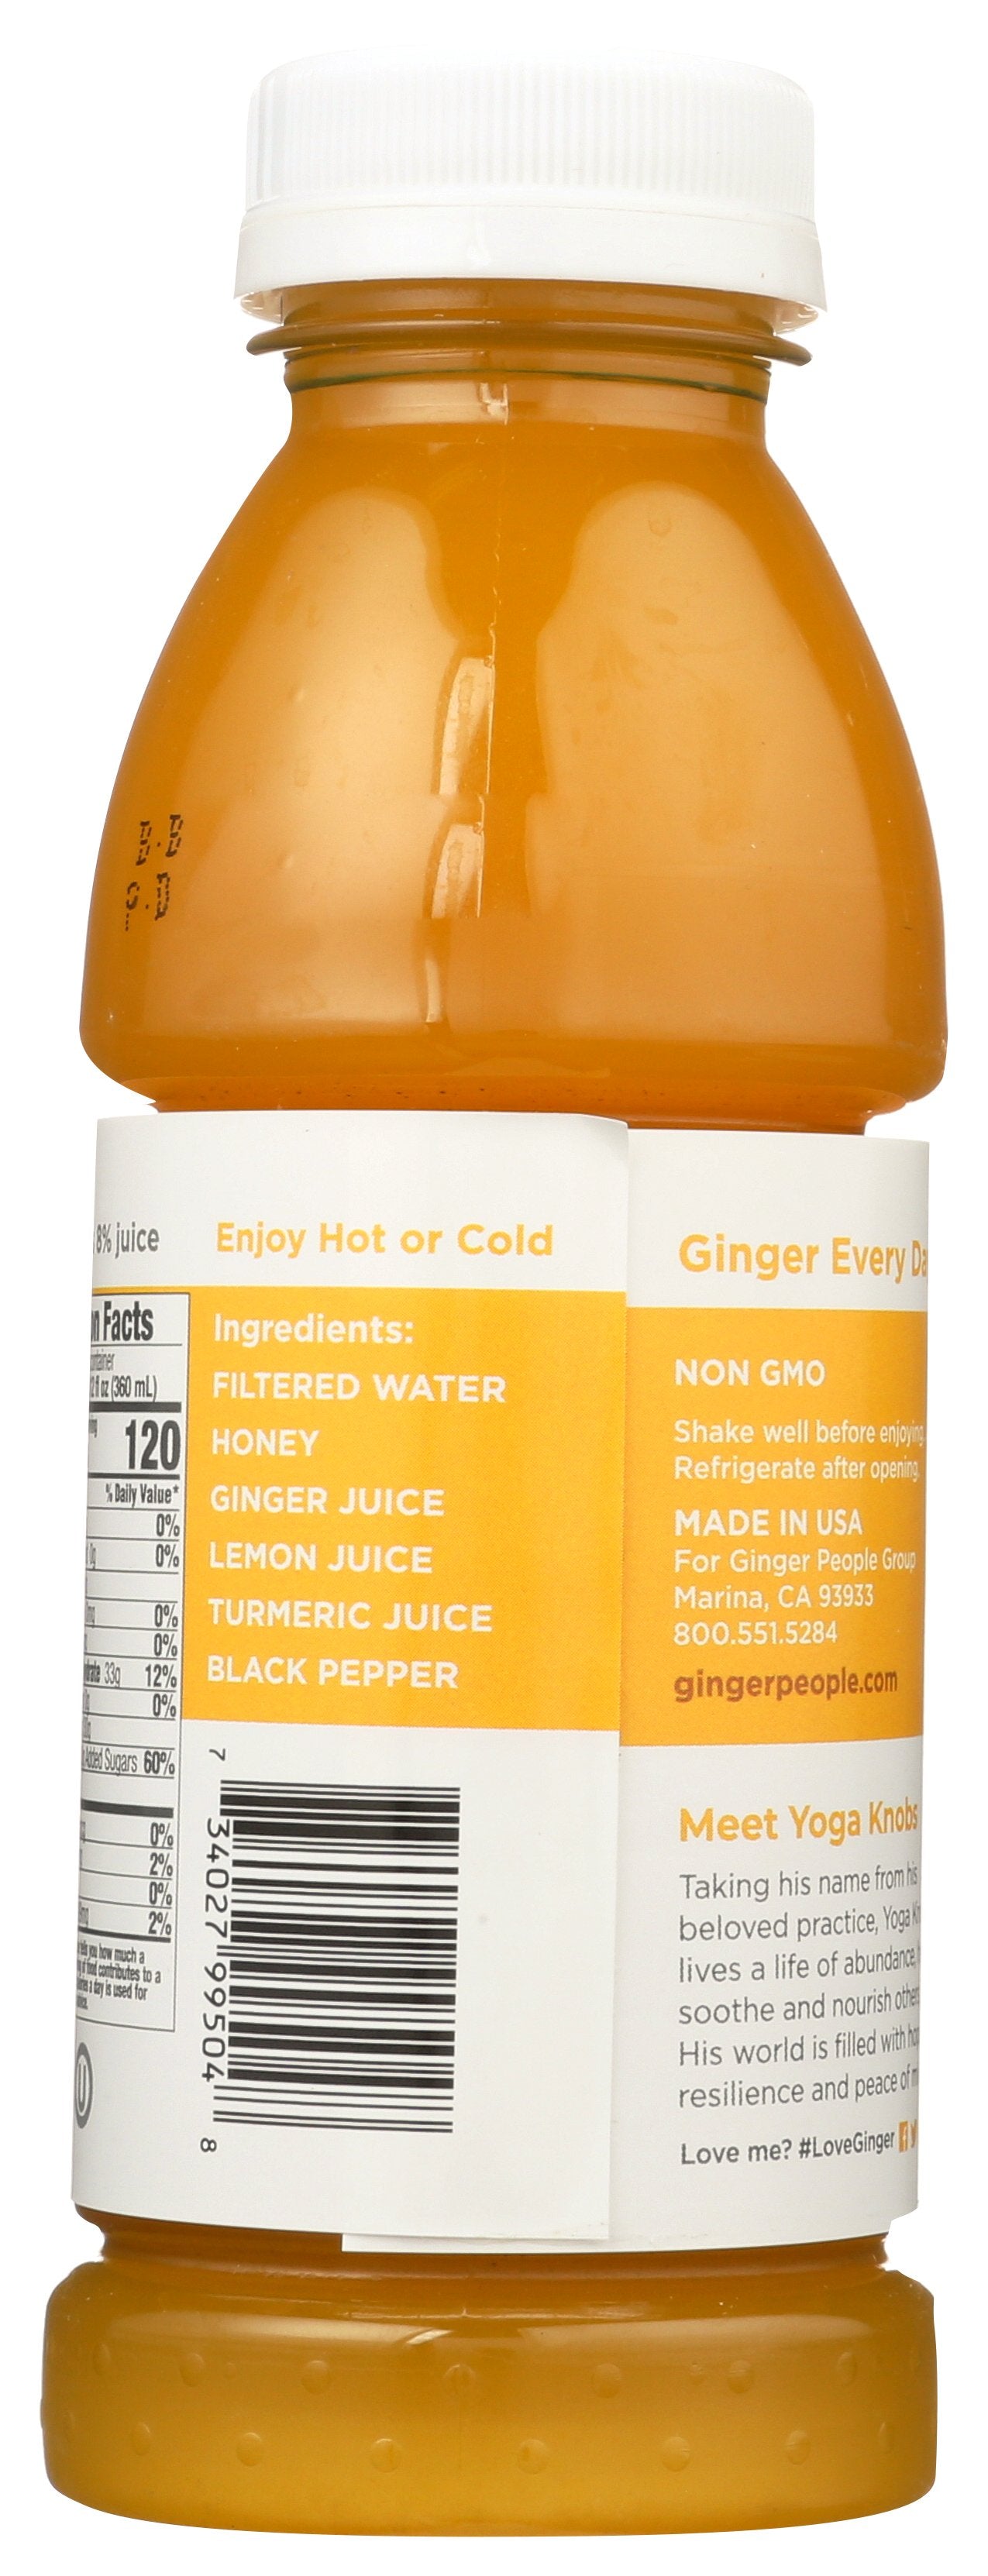 GINGER PEOPLE BEV GNGR TURMERIC SOOTHER - Case of 24